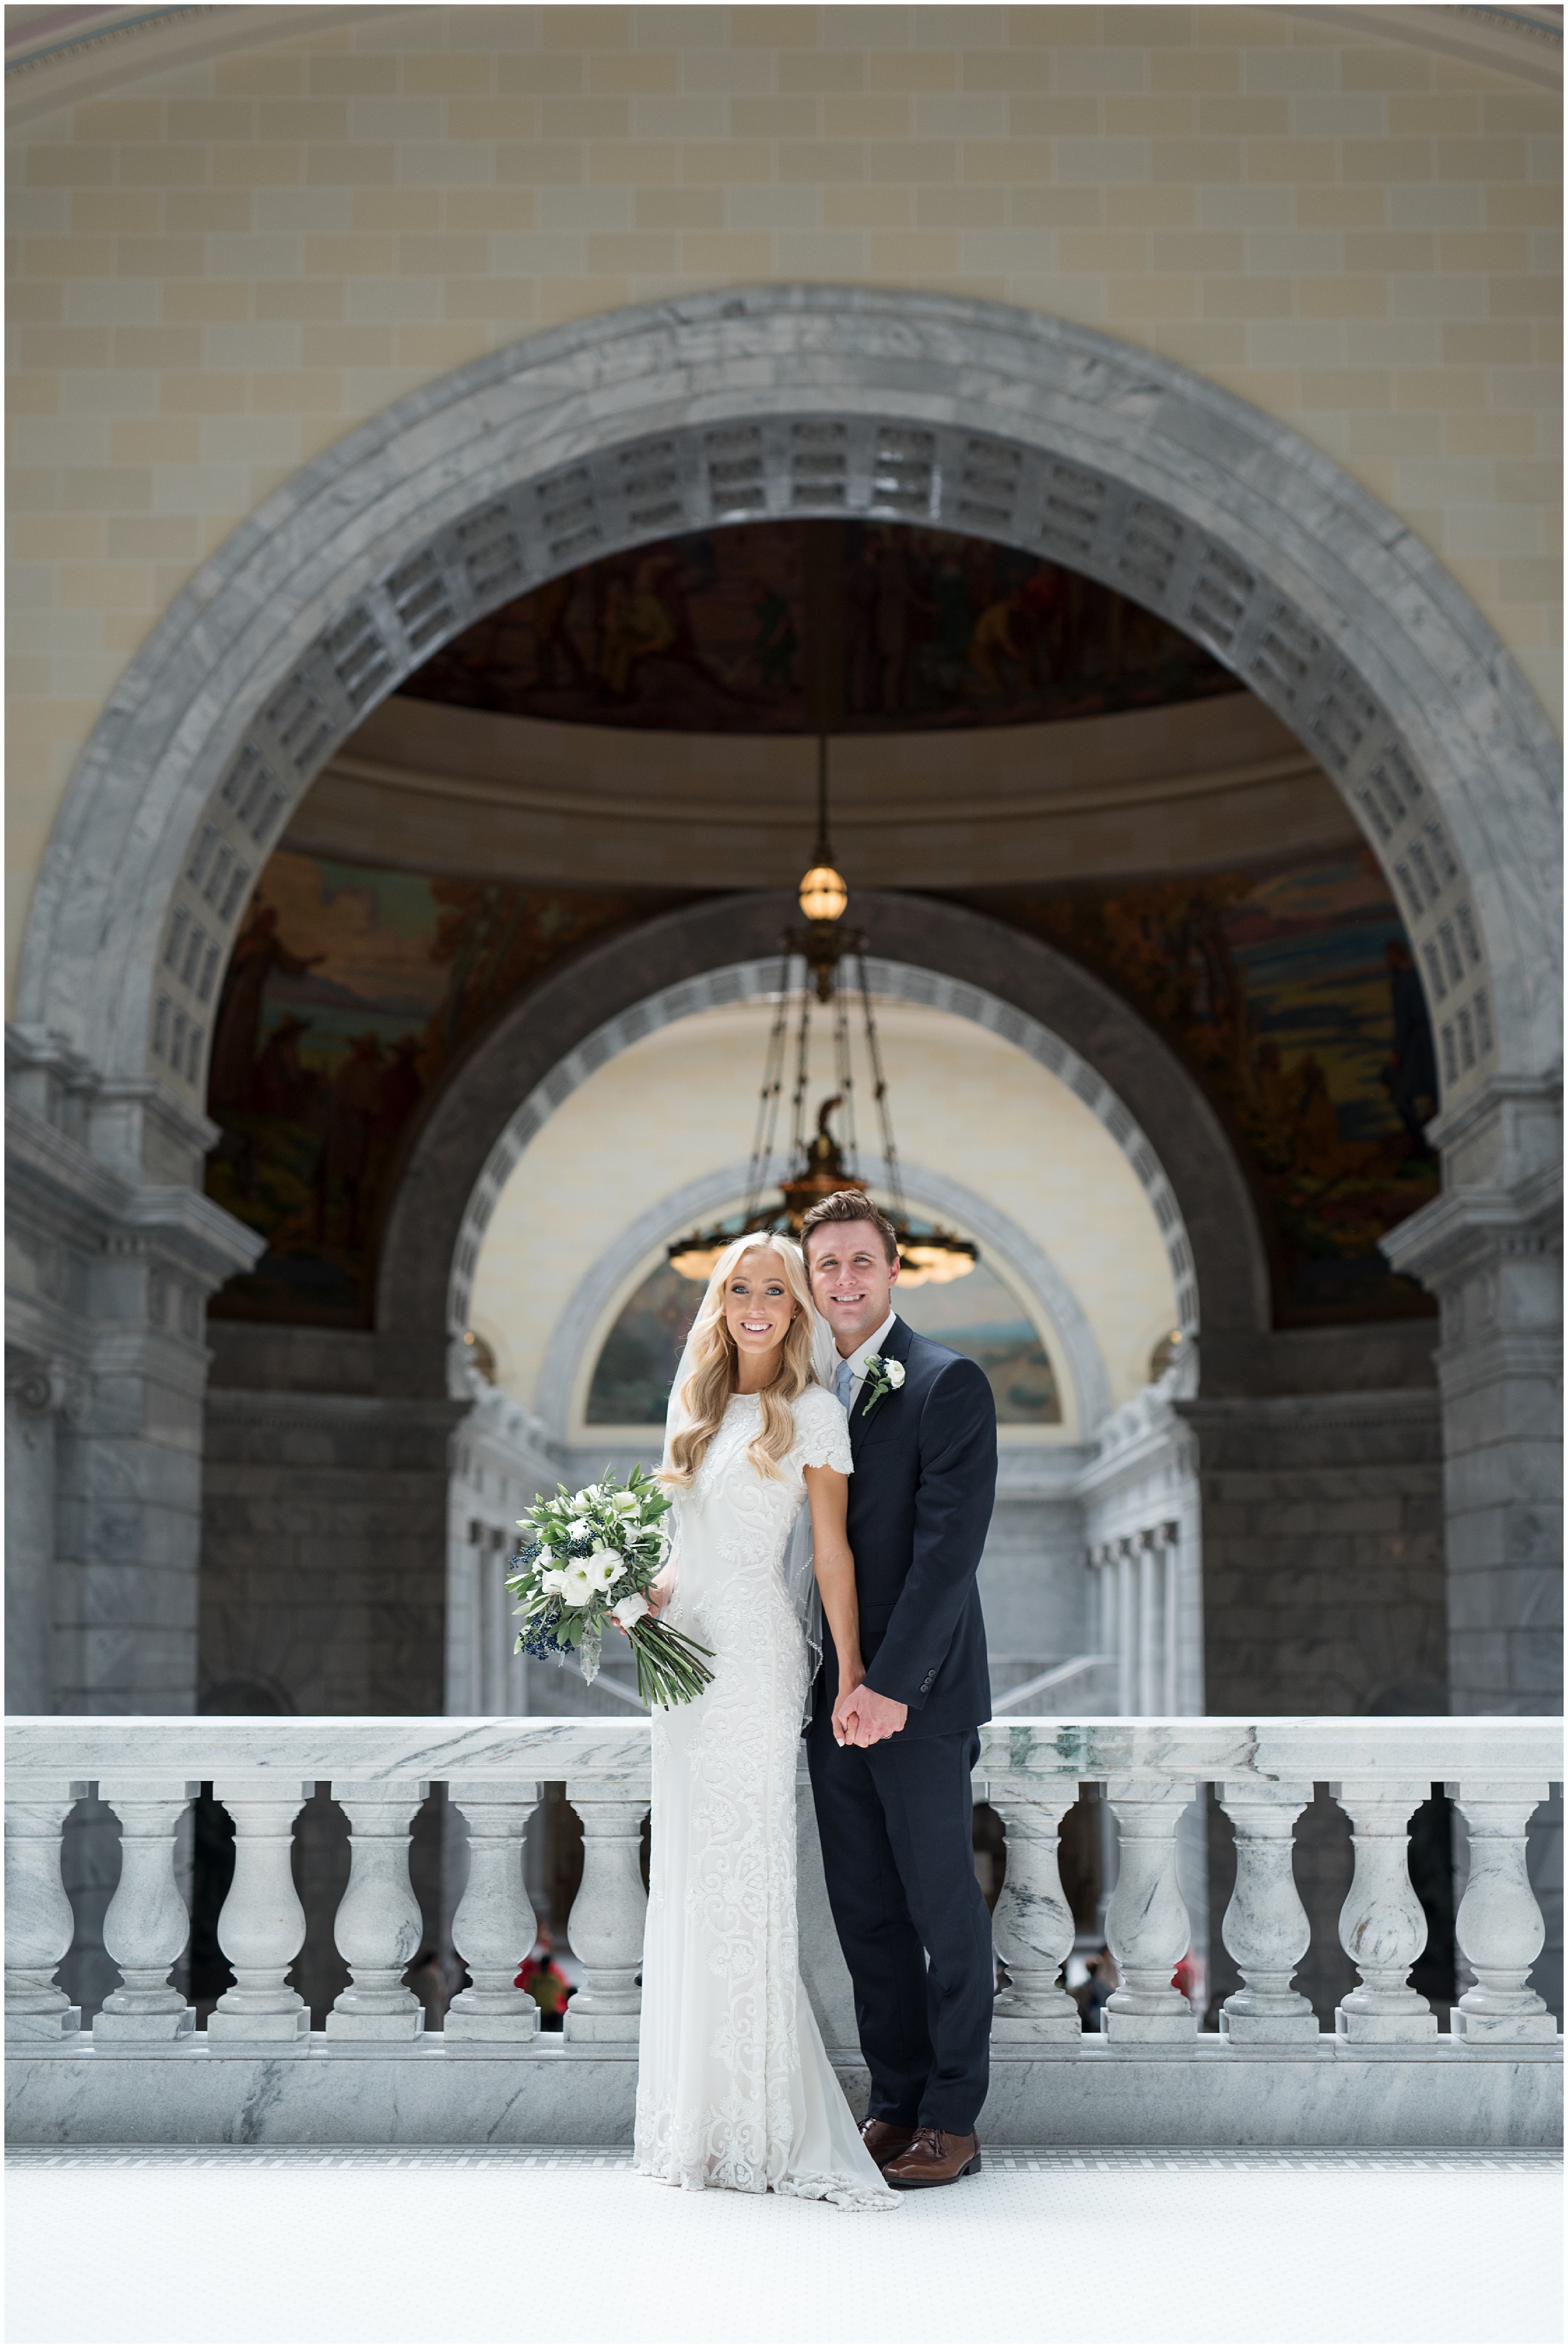 Utah state capital, navy suit, grand staircase, Utah wedding photographers, Utah wedding photographer, Utah wedding photography, Utah county wedding photography, Utah county wedding photographer, salt lake city photographers, salt lake city wedding photography, salt lake photographers, salt lake city photographers, photographers in Utah, Utah photography, photography Utah, photographer Utah, Kristina Curtis photography, Kristina Curtis Photographer, www.kristinacurtisphotography.com